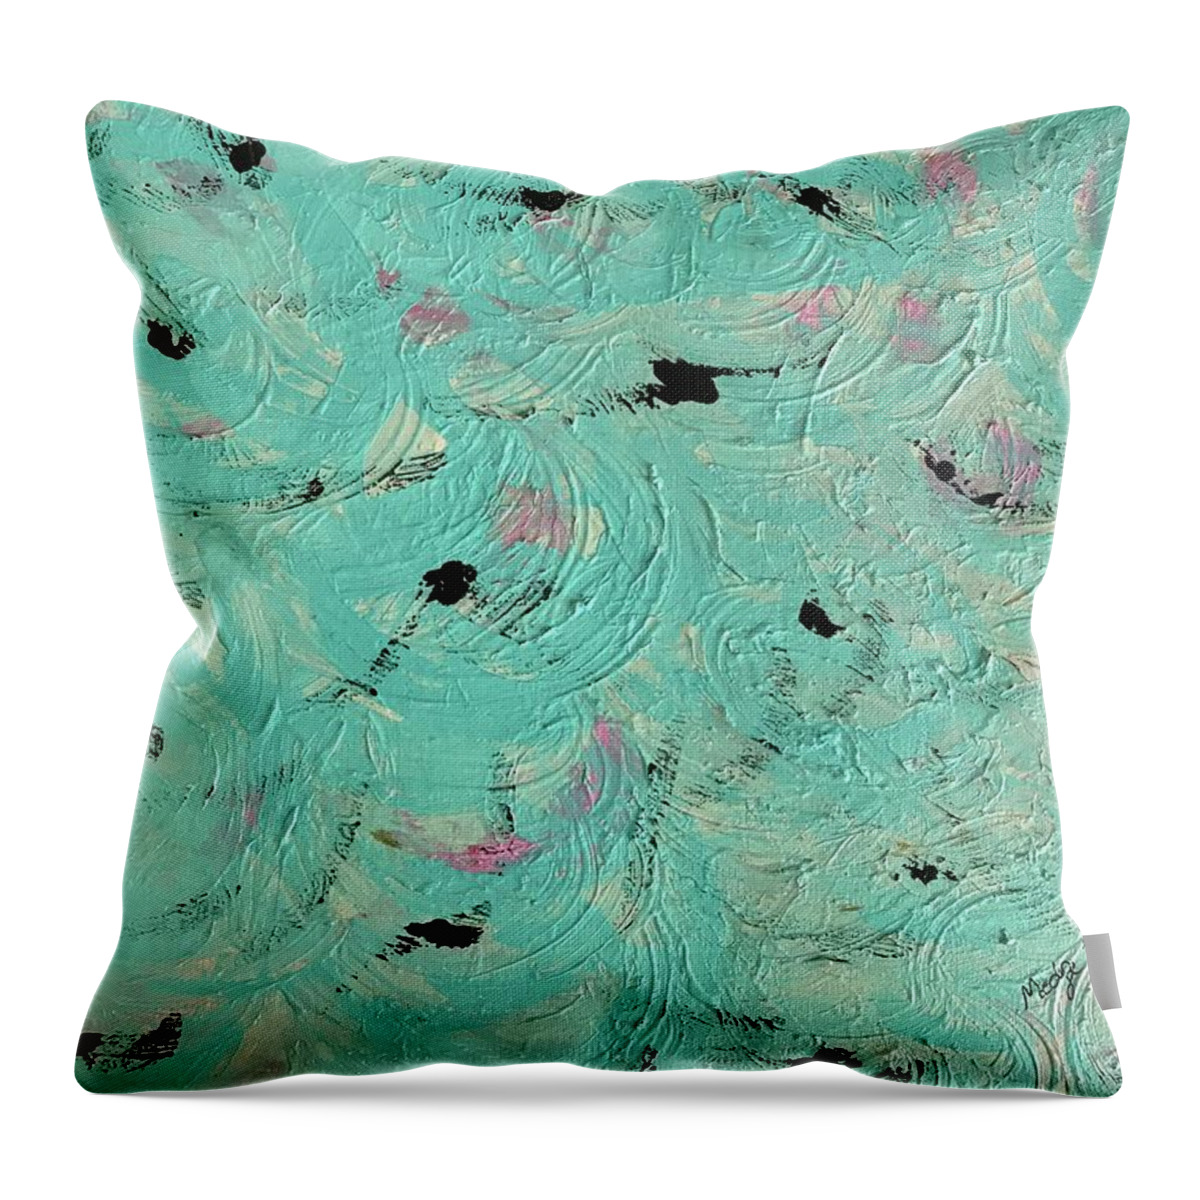 Game Water Sea Sun Turquoise Throw Pillow featuring the painting Water Game by Medge Jaspan